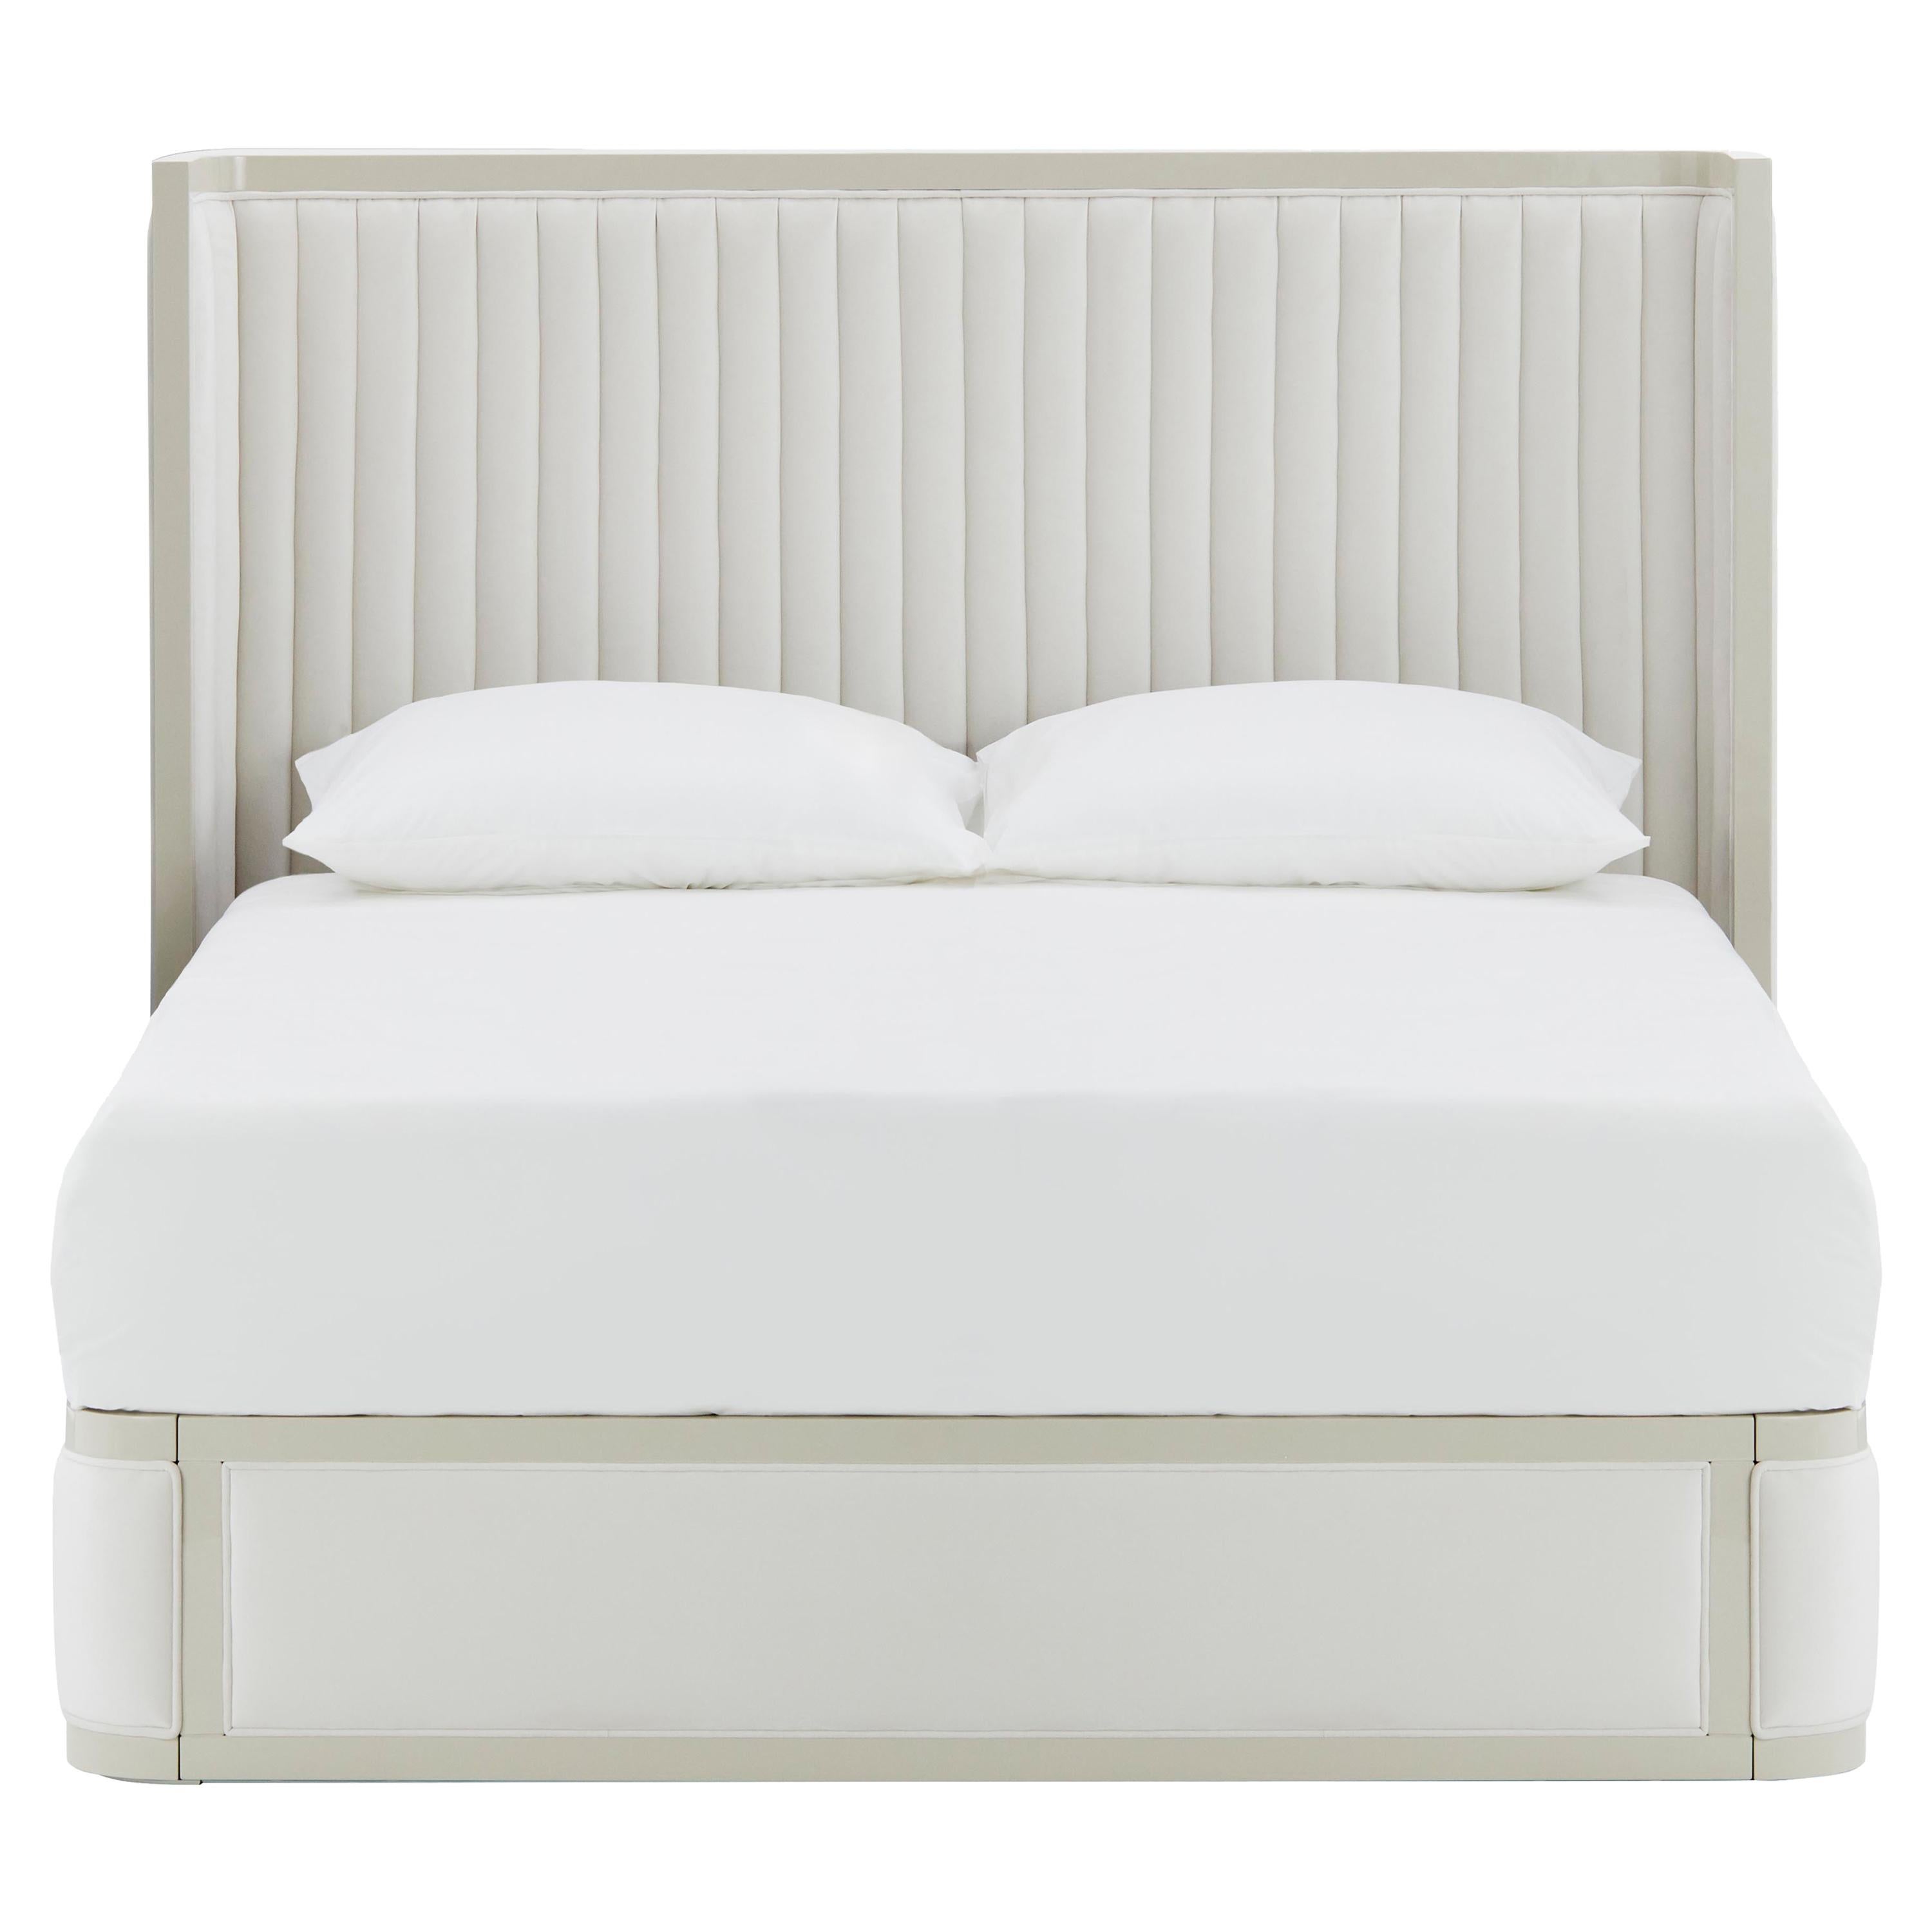 AGATHA bed with padded headboard For Sale